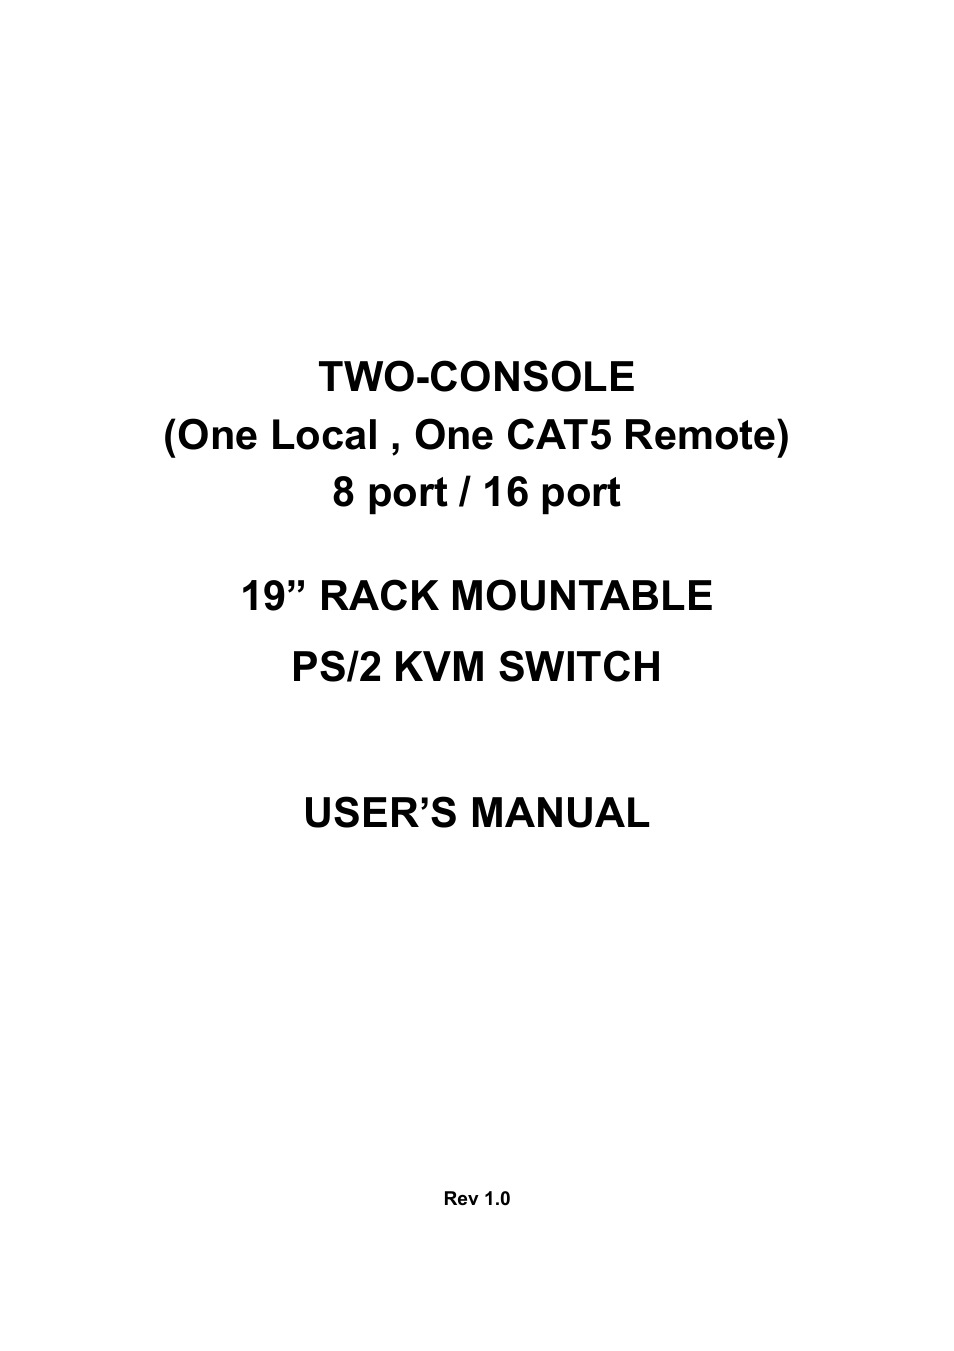 Two-console 16 port PS/2 KVM Switch